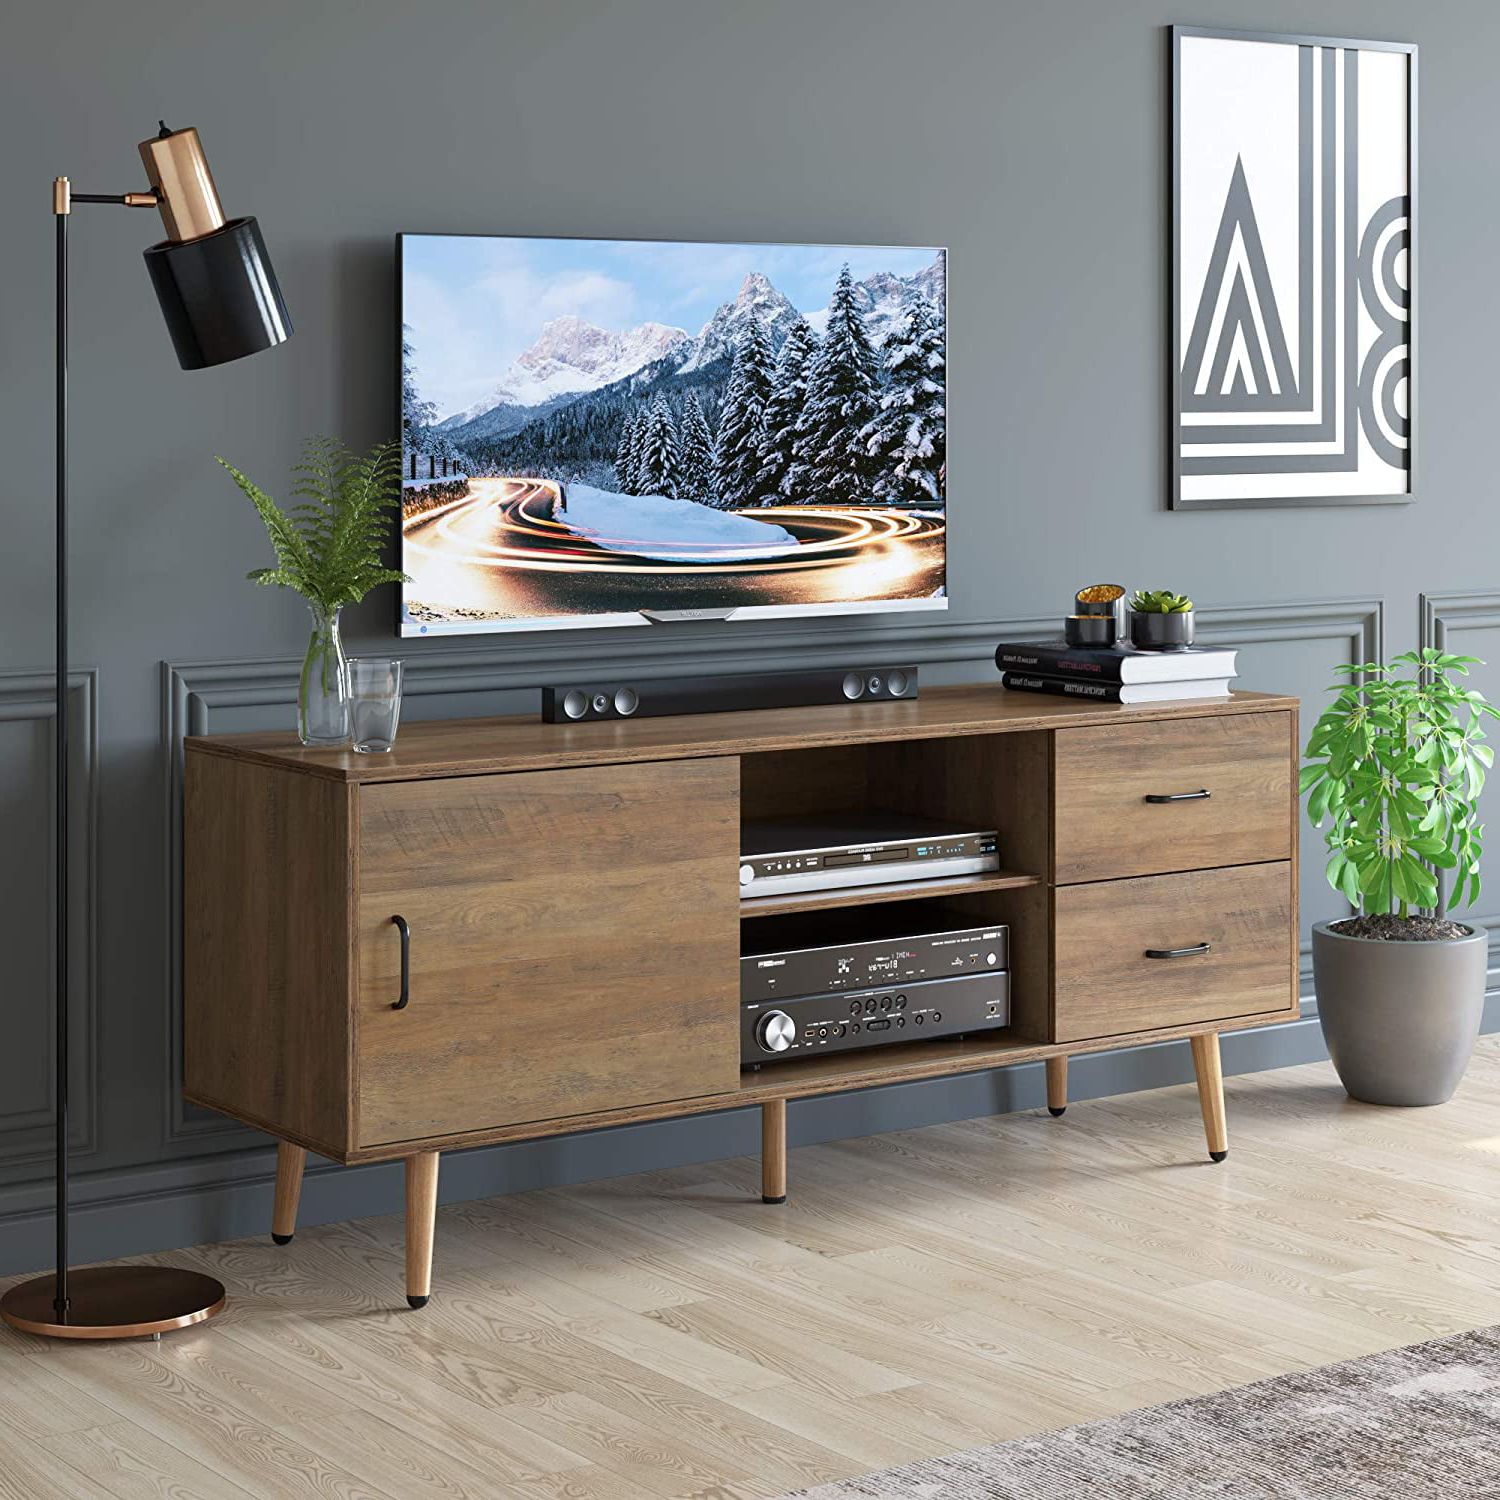 2019 Cafe Tv Stands With Storage With Homfa Tv Cabinet Media Console Table, Wood Tv Stand For Tvs Up To  (View 6 of 15)